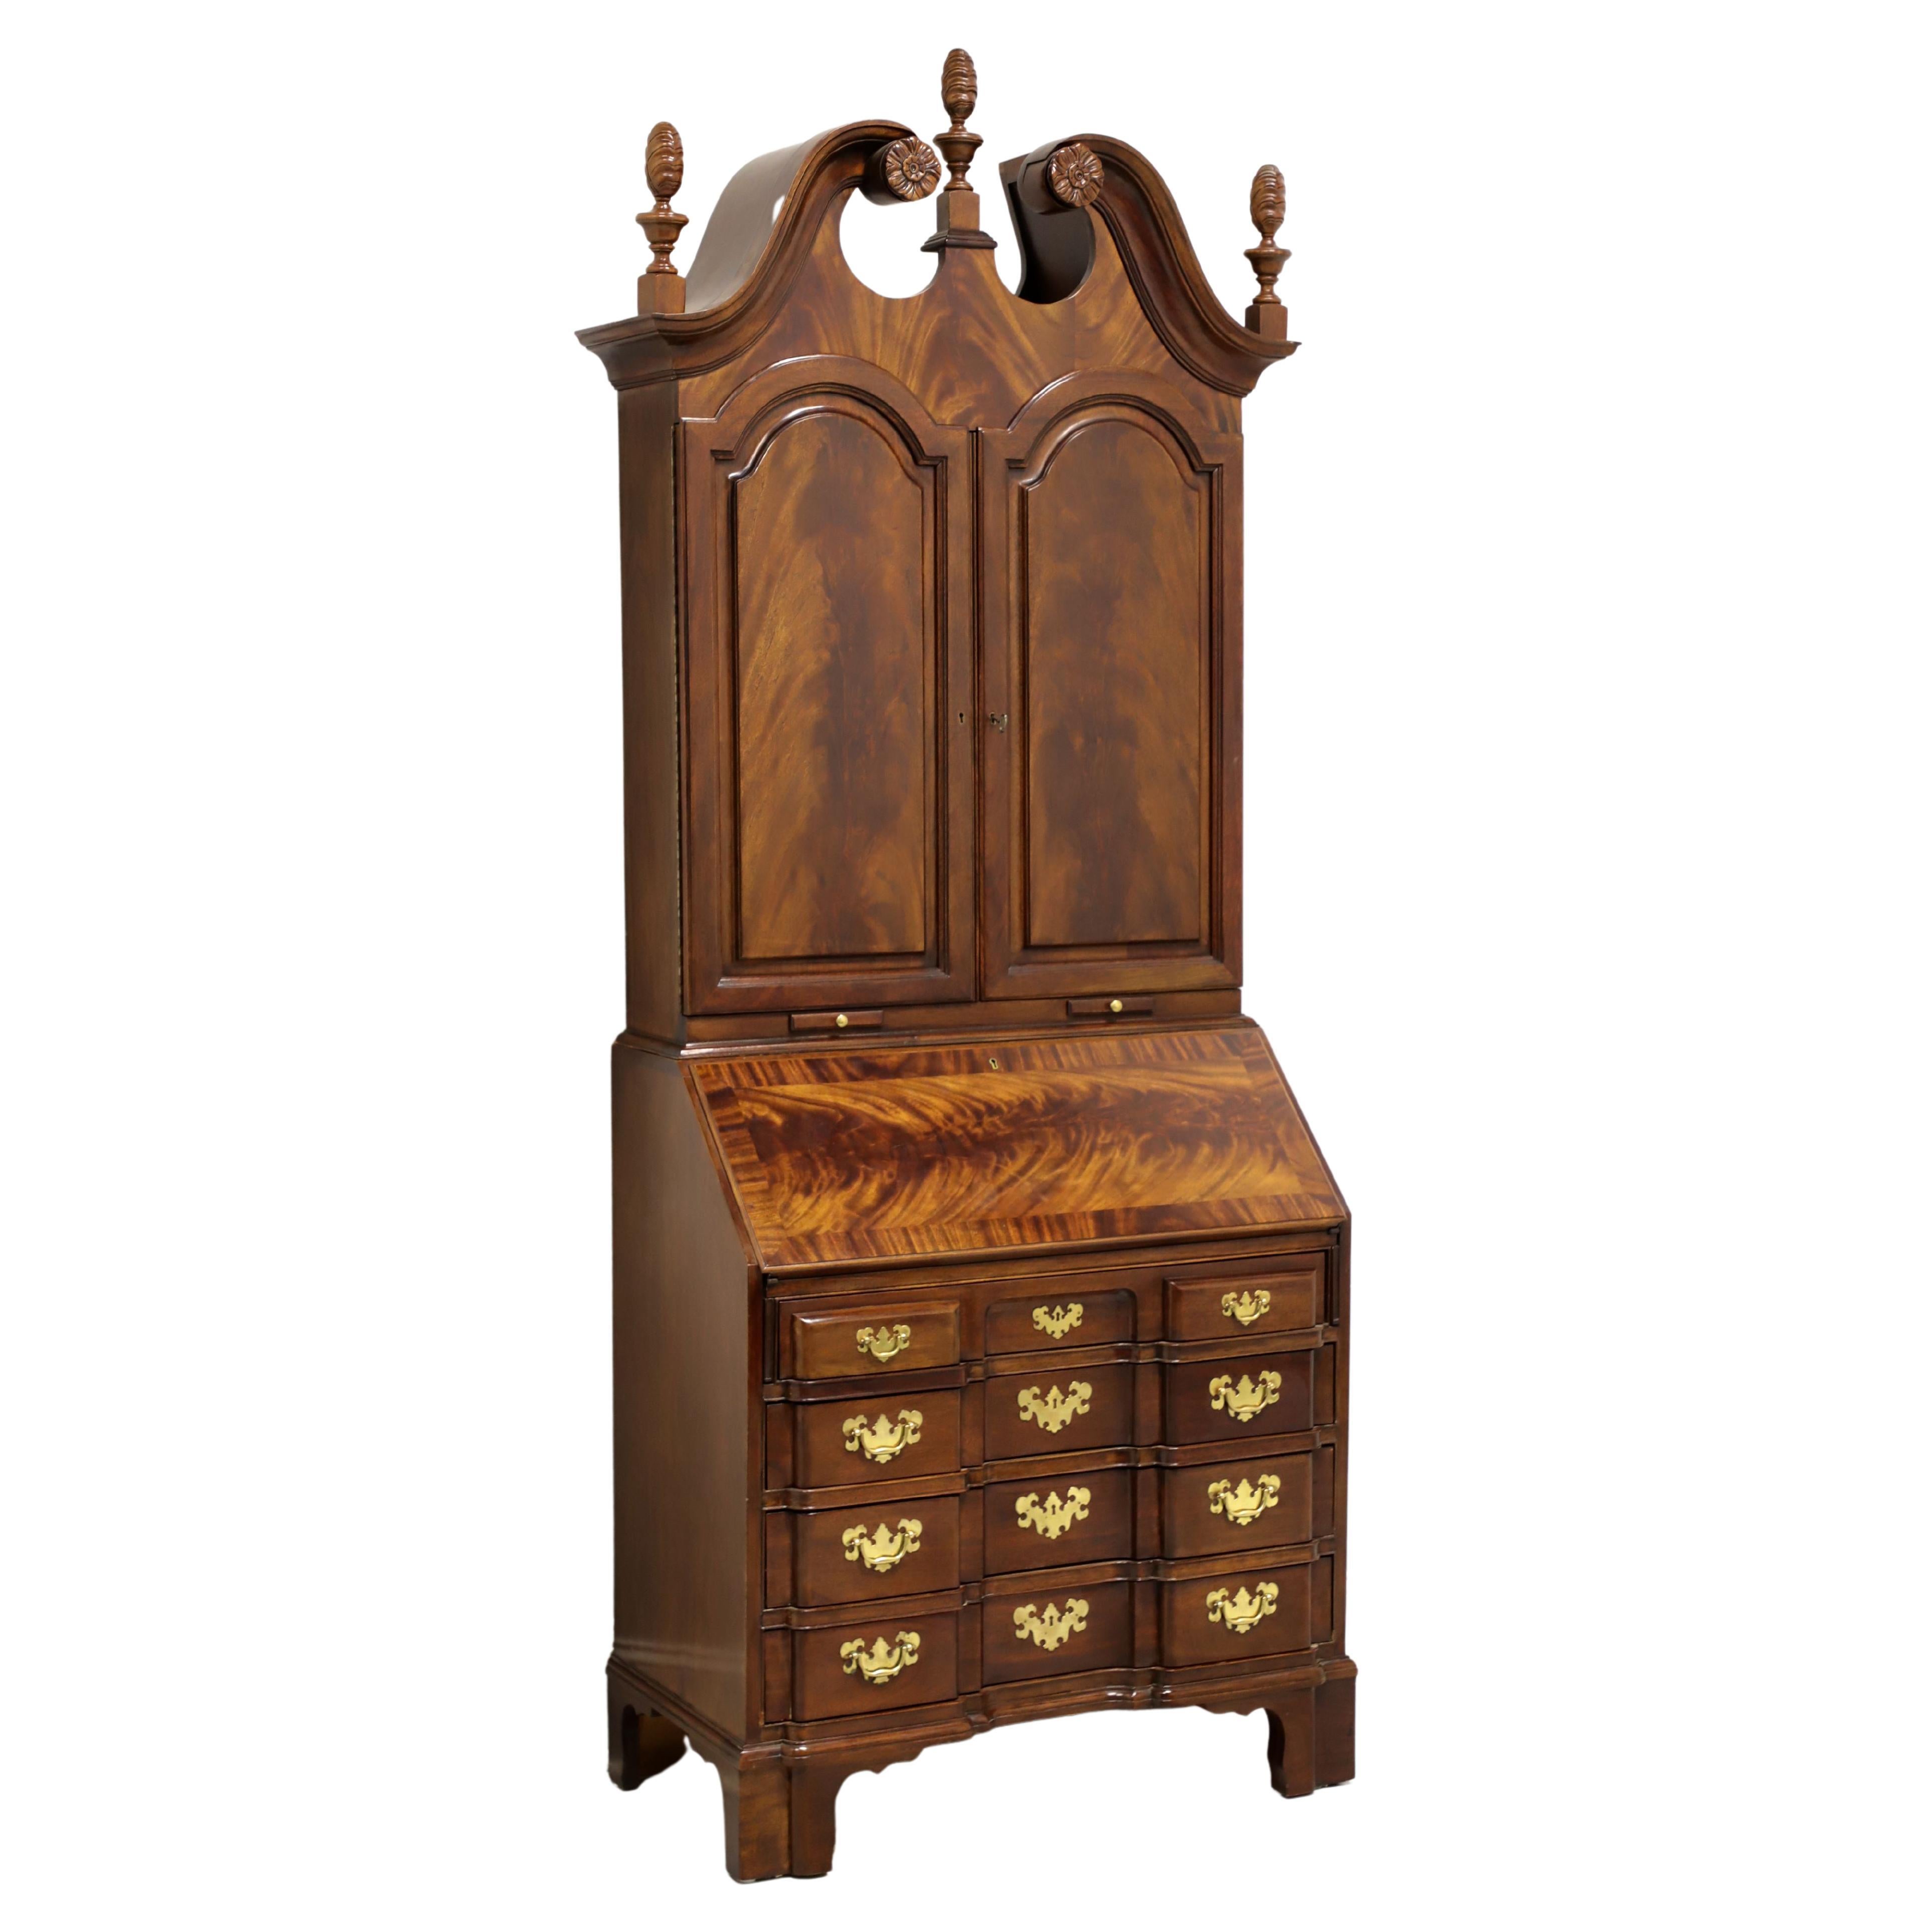 TOMLINSON Crotch Mahogany Block Front Secretary Desk with Blind Bookcase For Sale